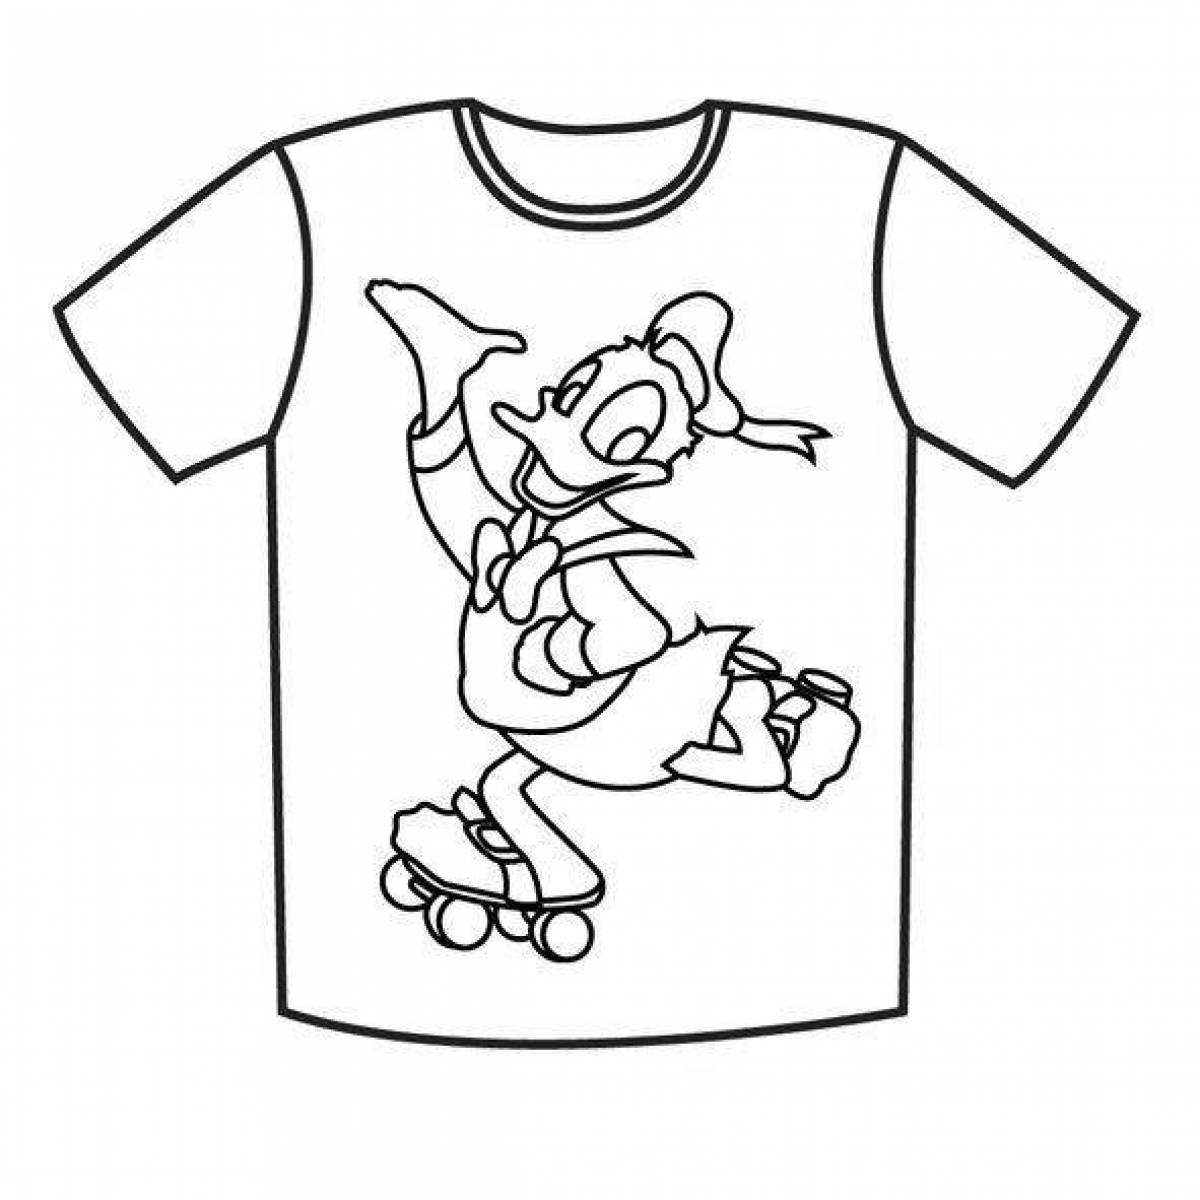 Colorful t-shirt coloring page for kids to express themselves